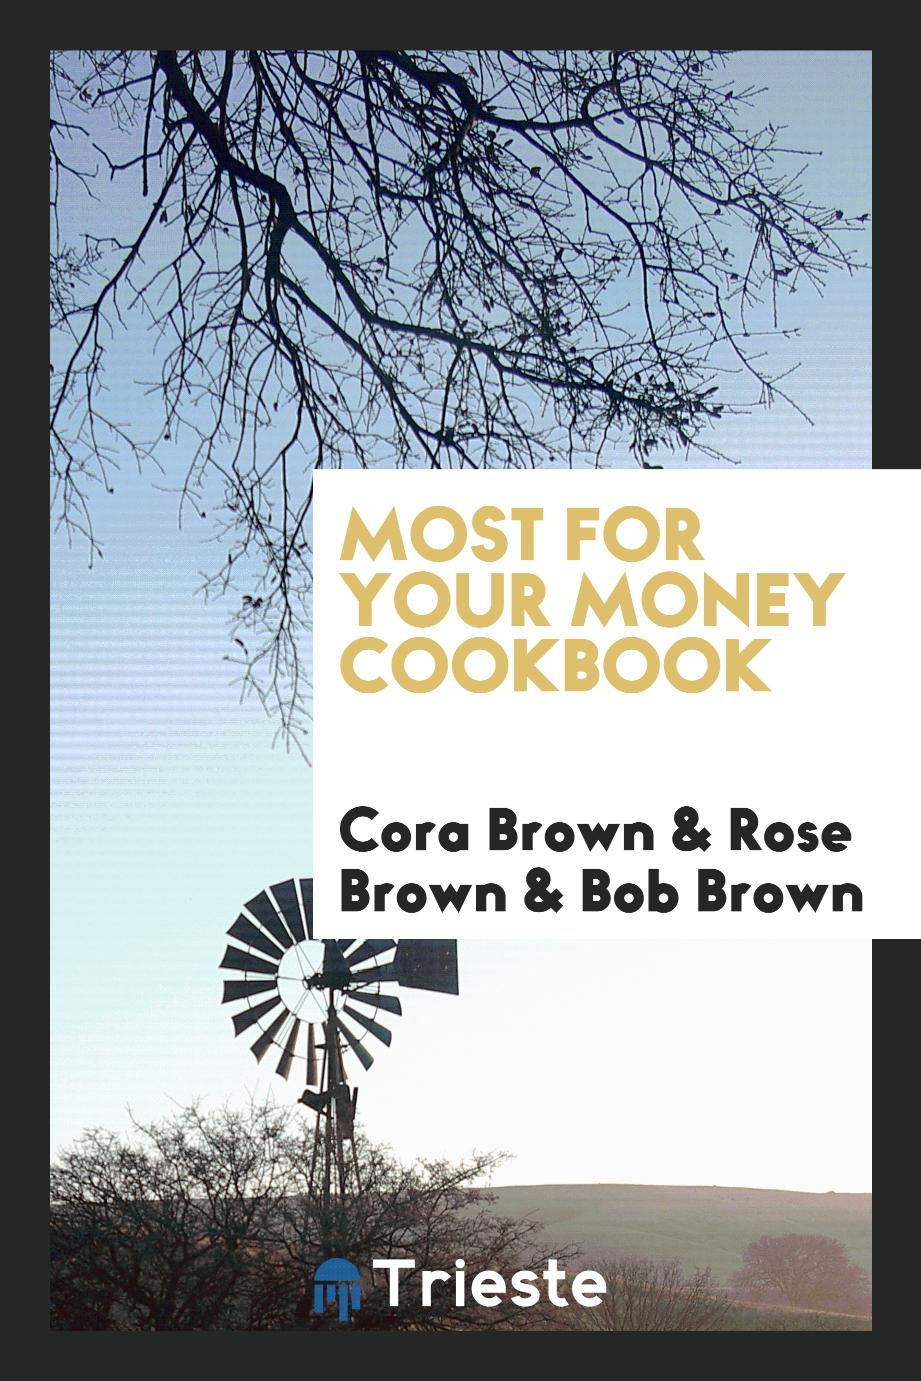 Most for your money cookbook